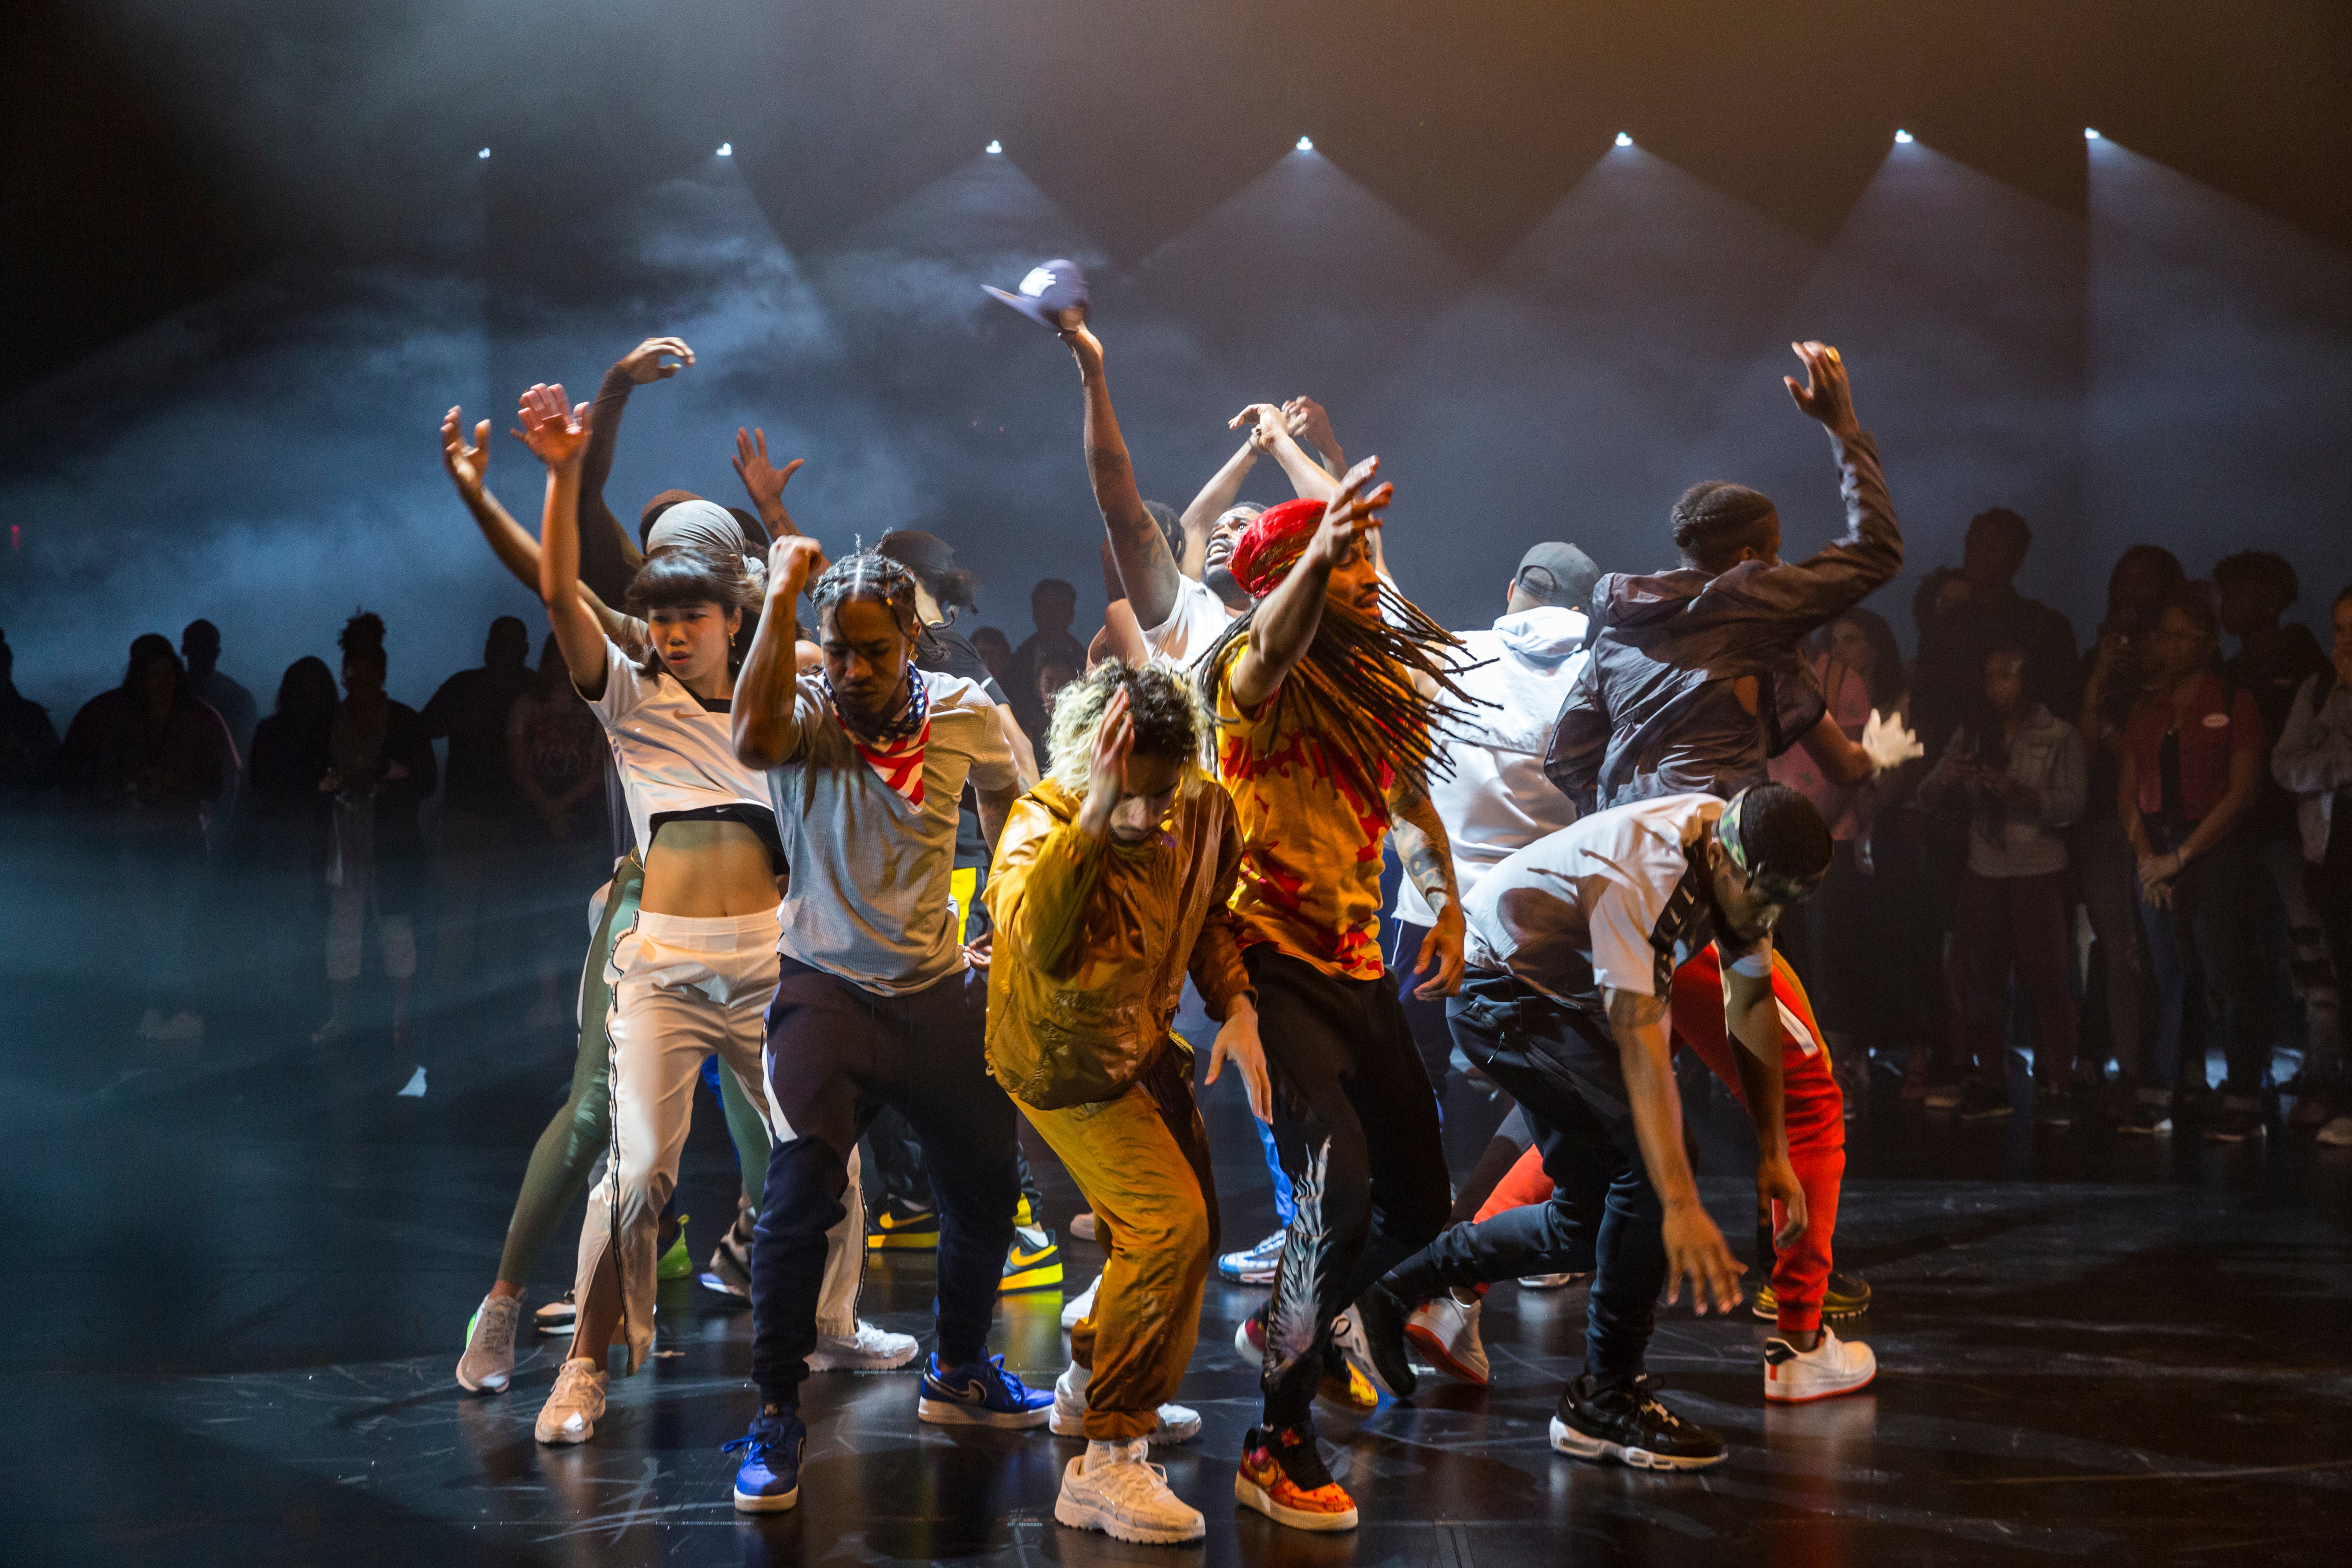 Street Dance Evolves From The Subway To Centerstage In The Powerful Performance ‘Maze’